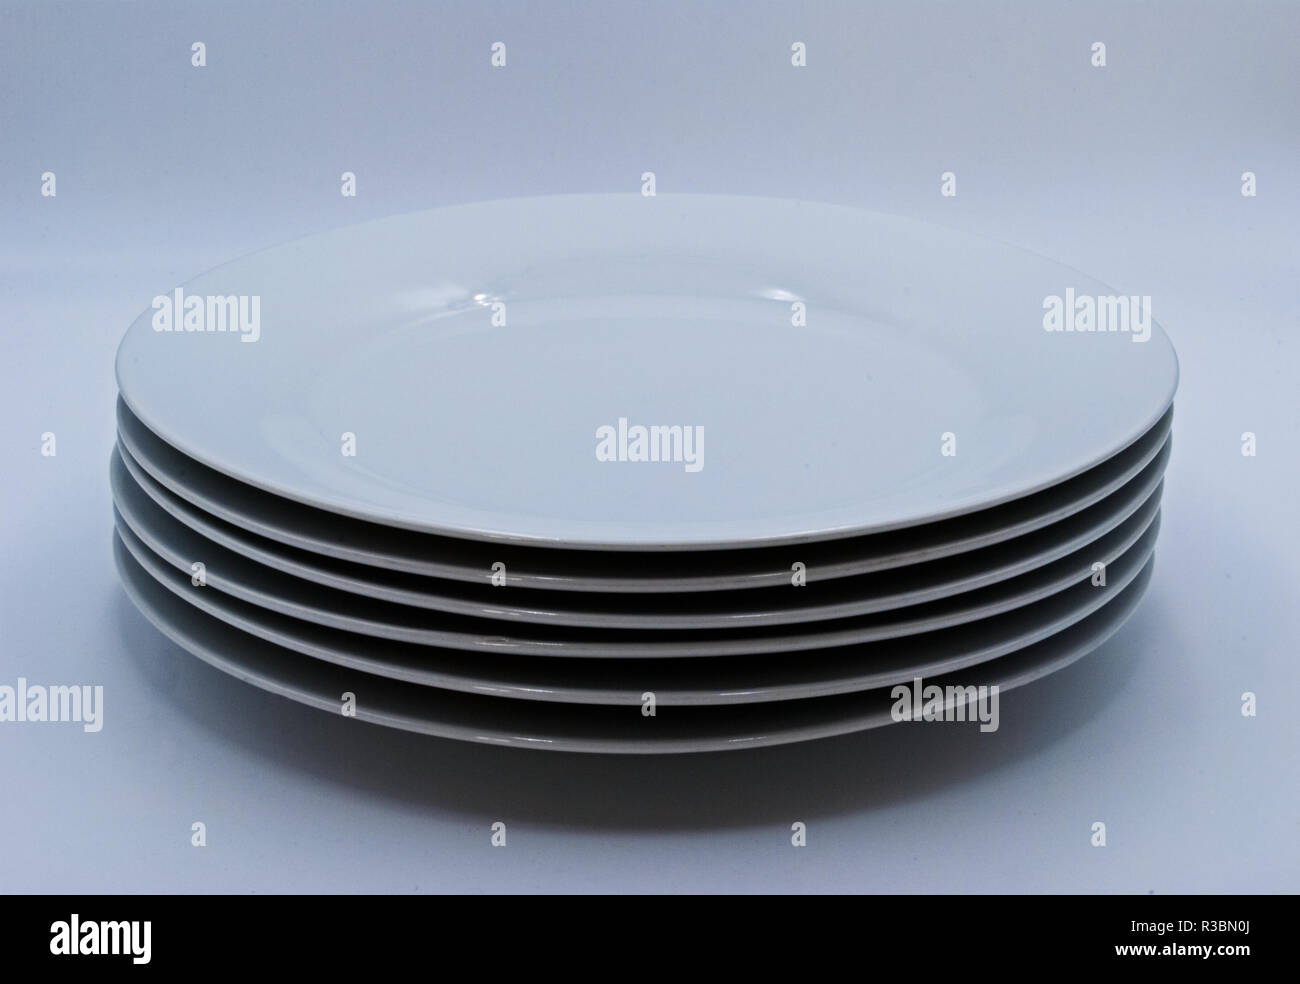 stack of plates on a white background Stock Photo